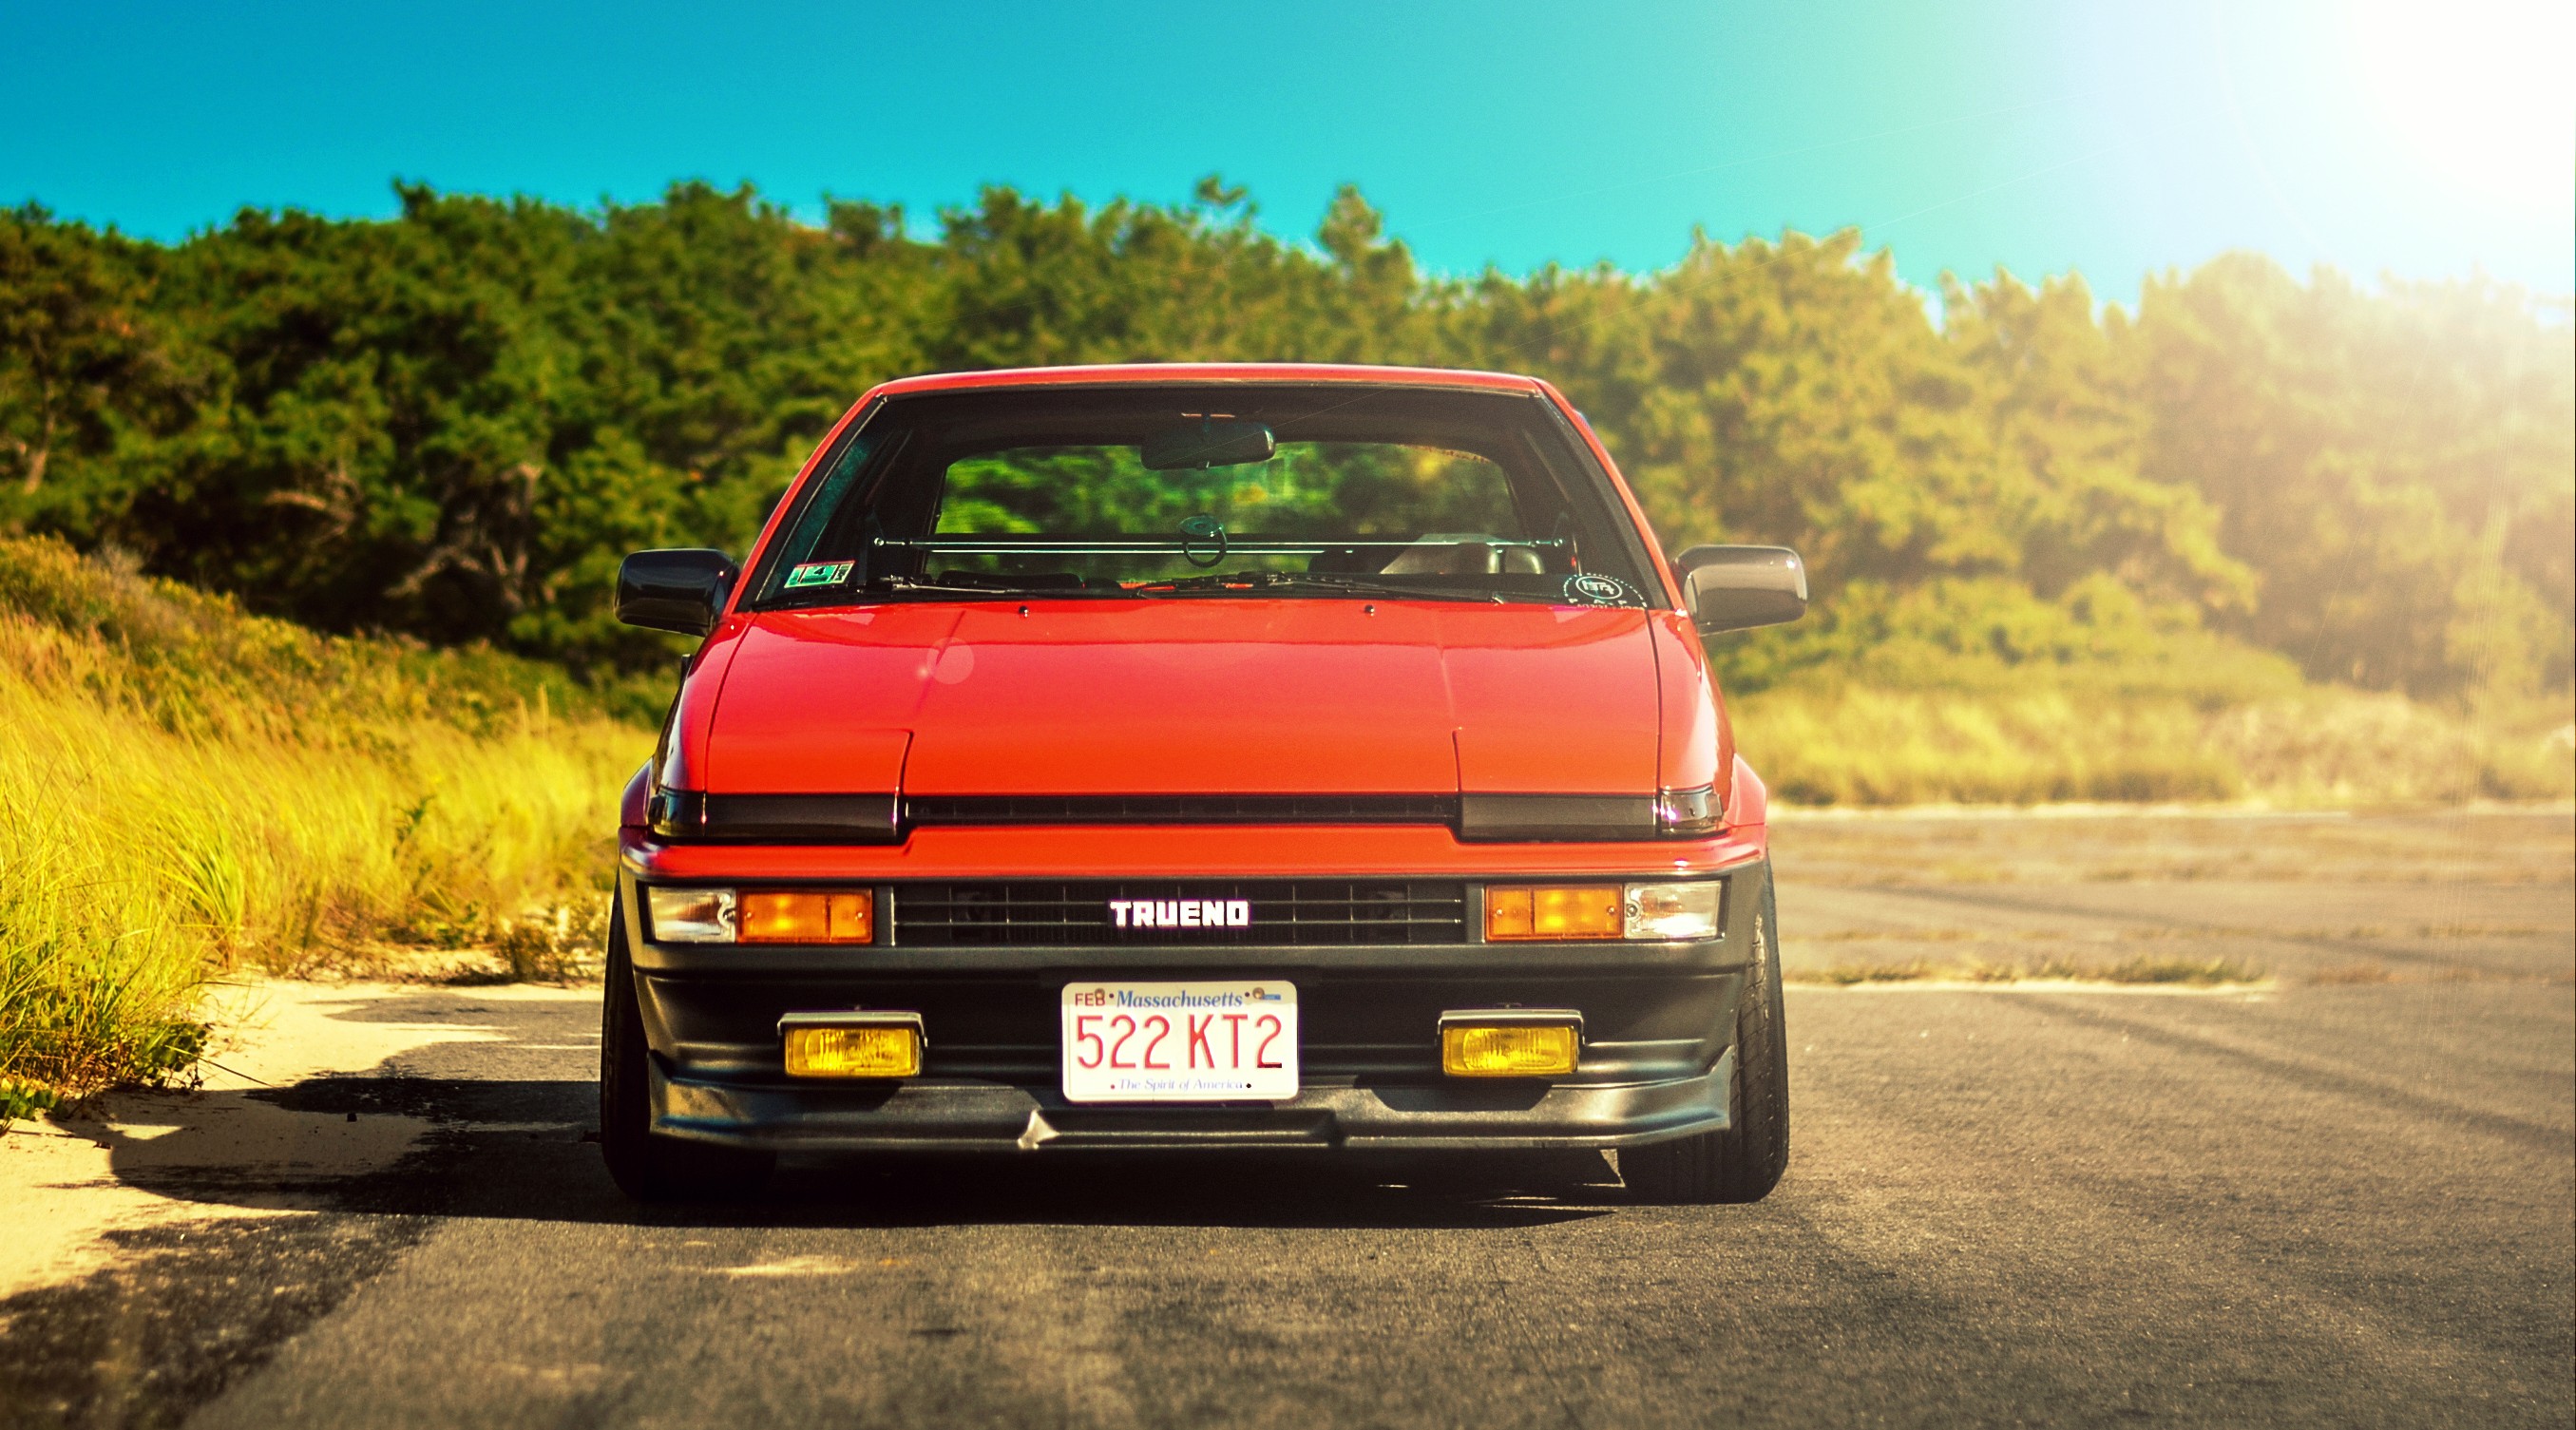 Red Toyota Corolla Ae86 Background The Wallpaper